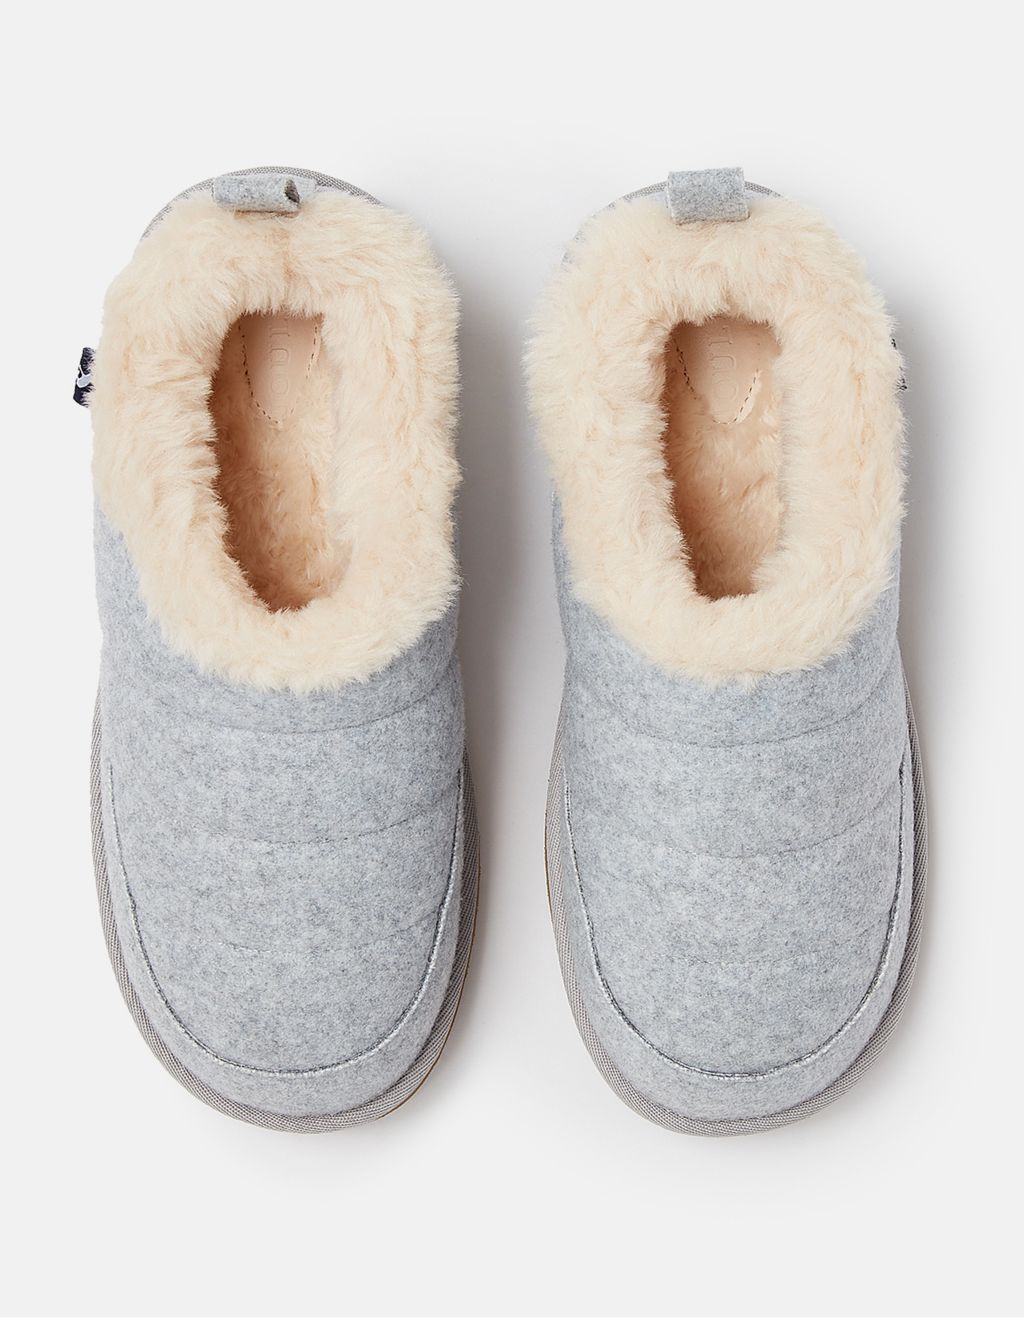 Faux Fur Lined Mule Slippers image 2